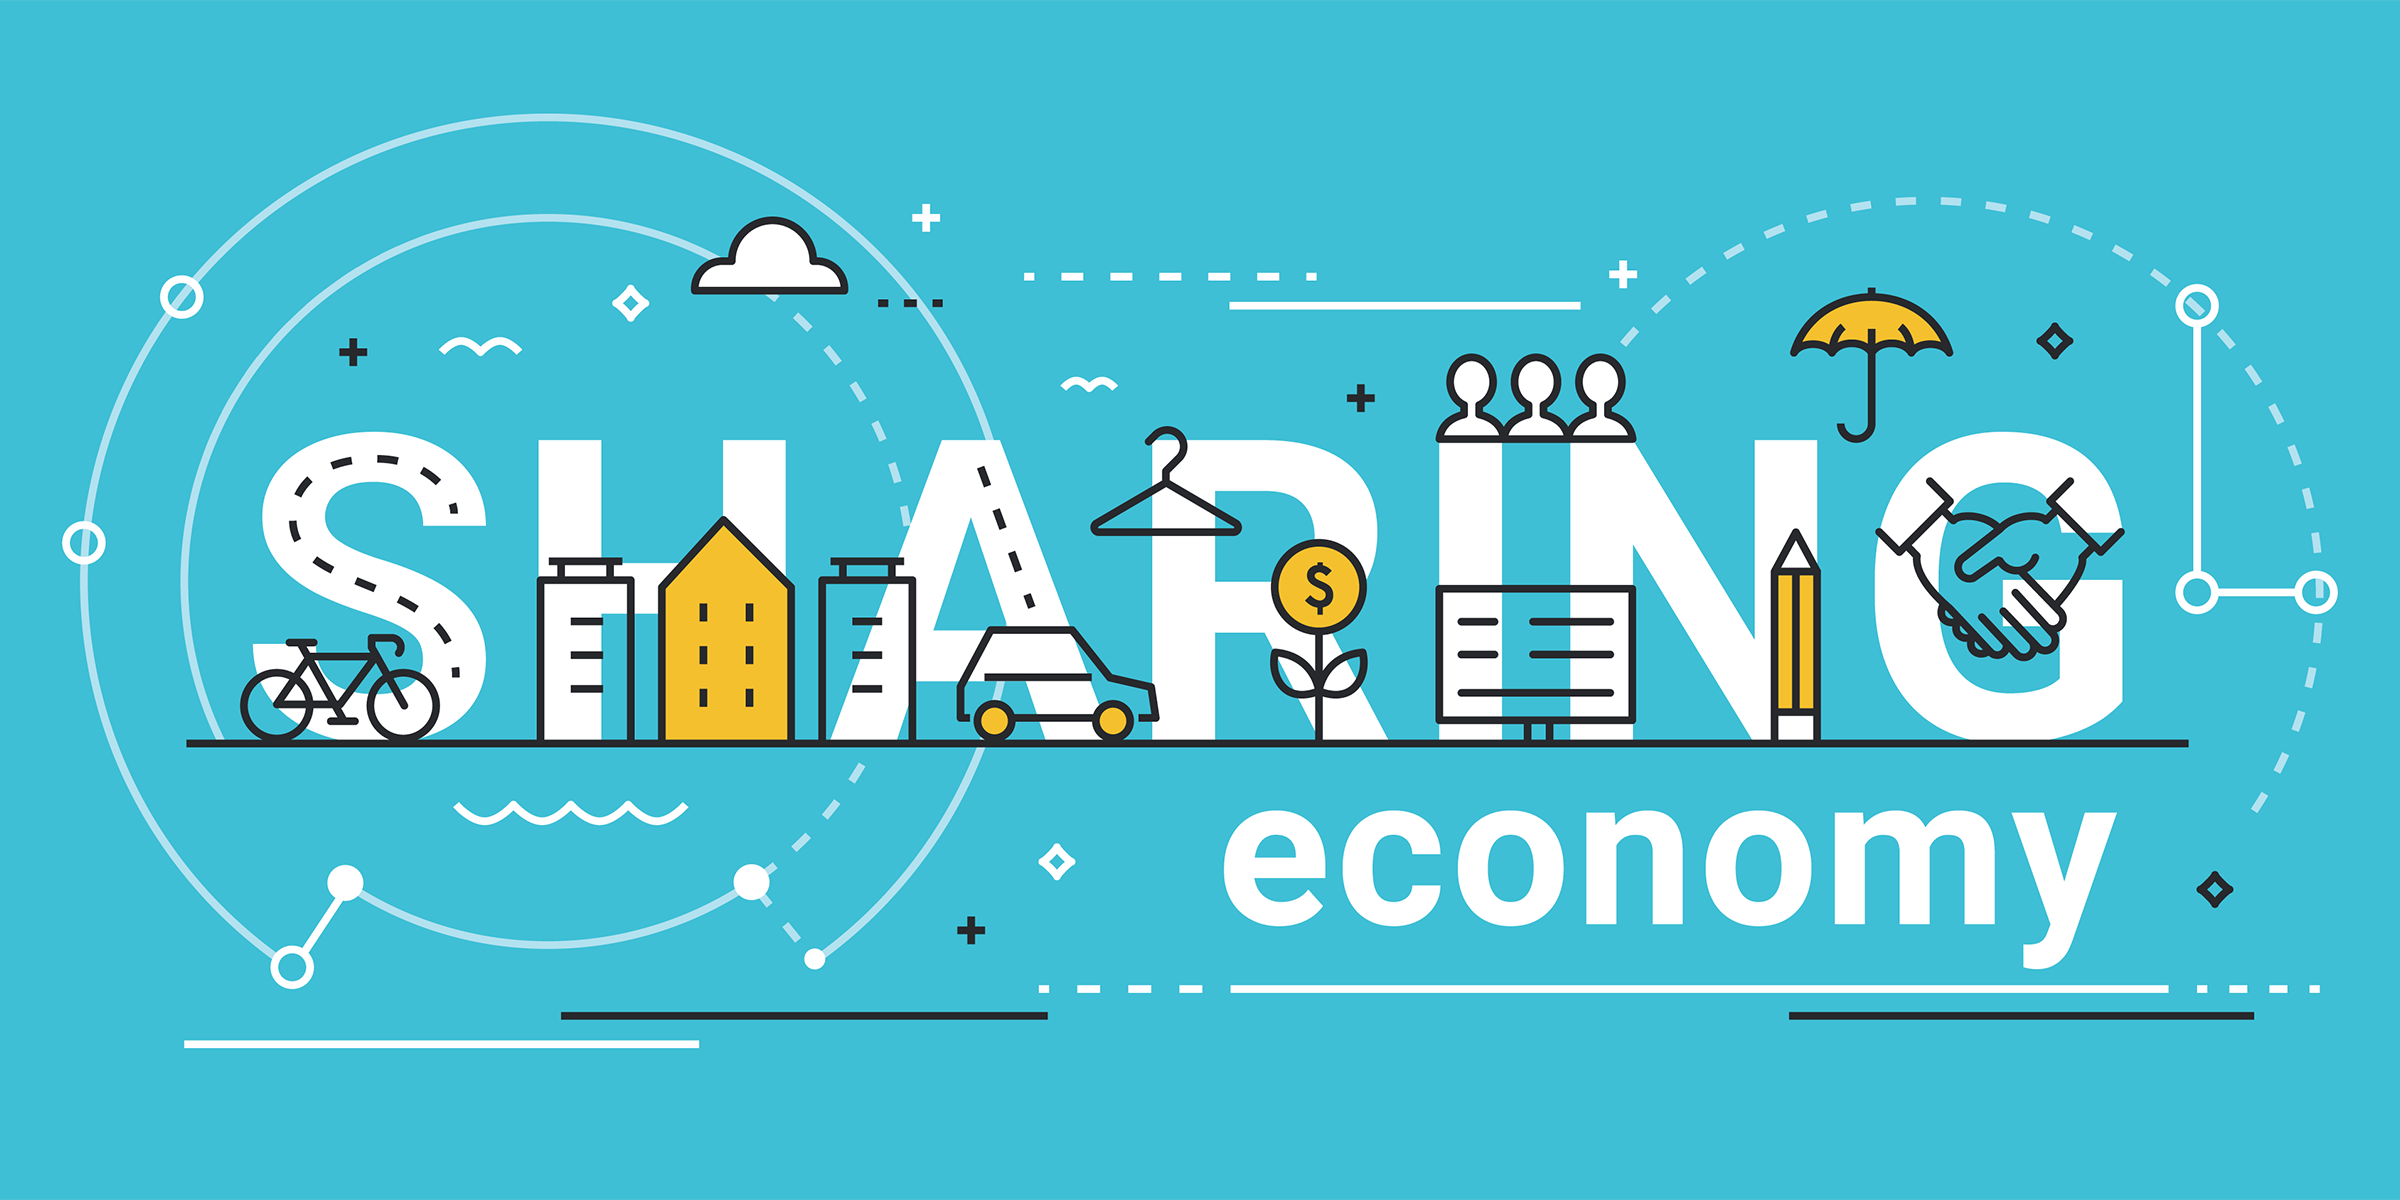 research questions sharing economy